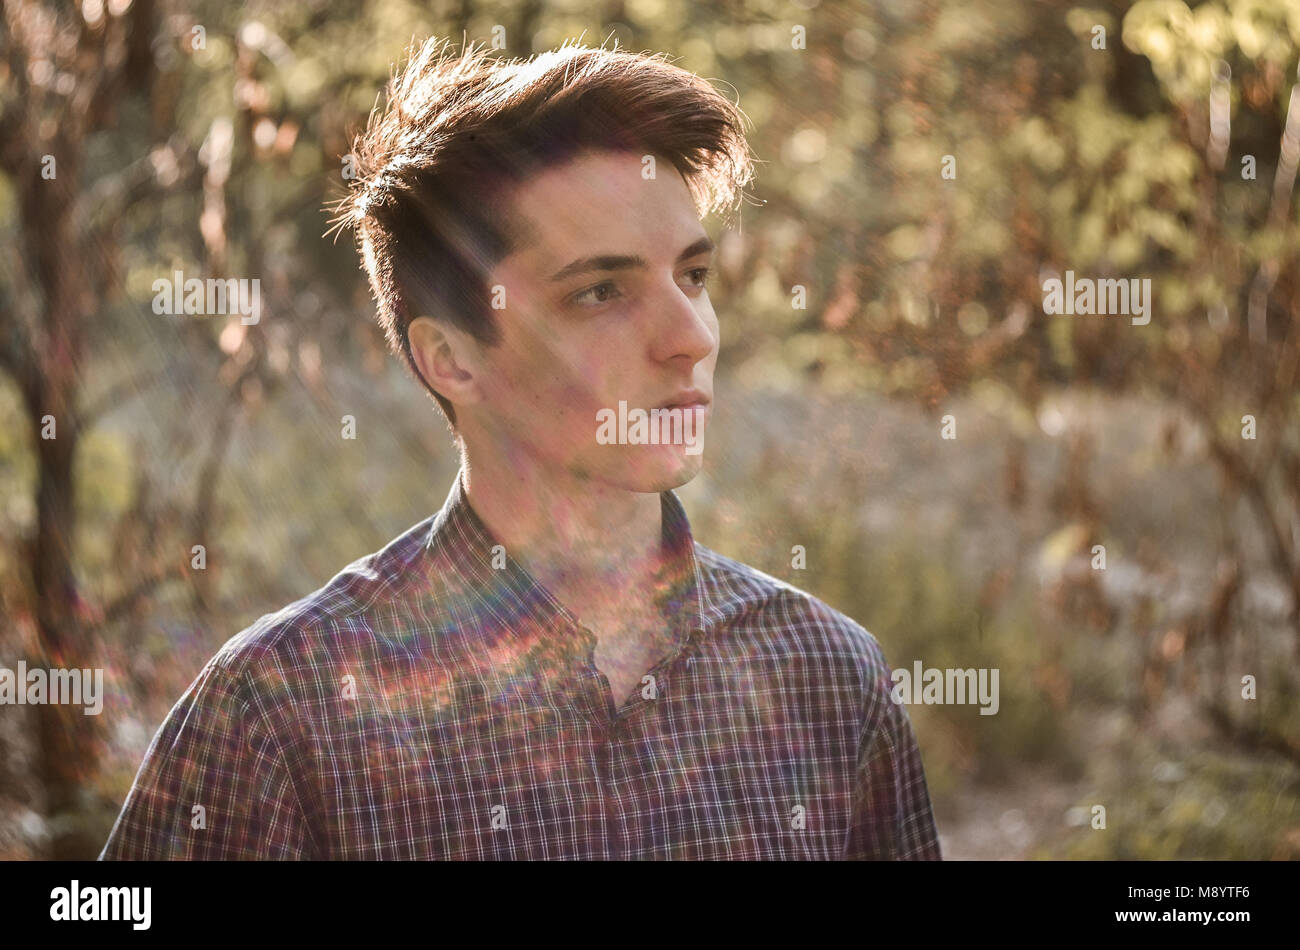 Portrait of serious thoughtful teenage boy outdoors Stock Photo